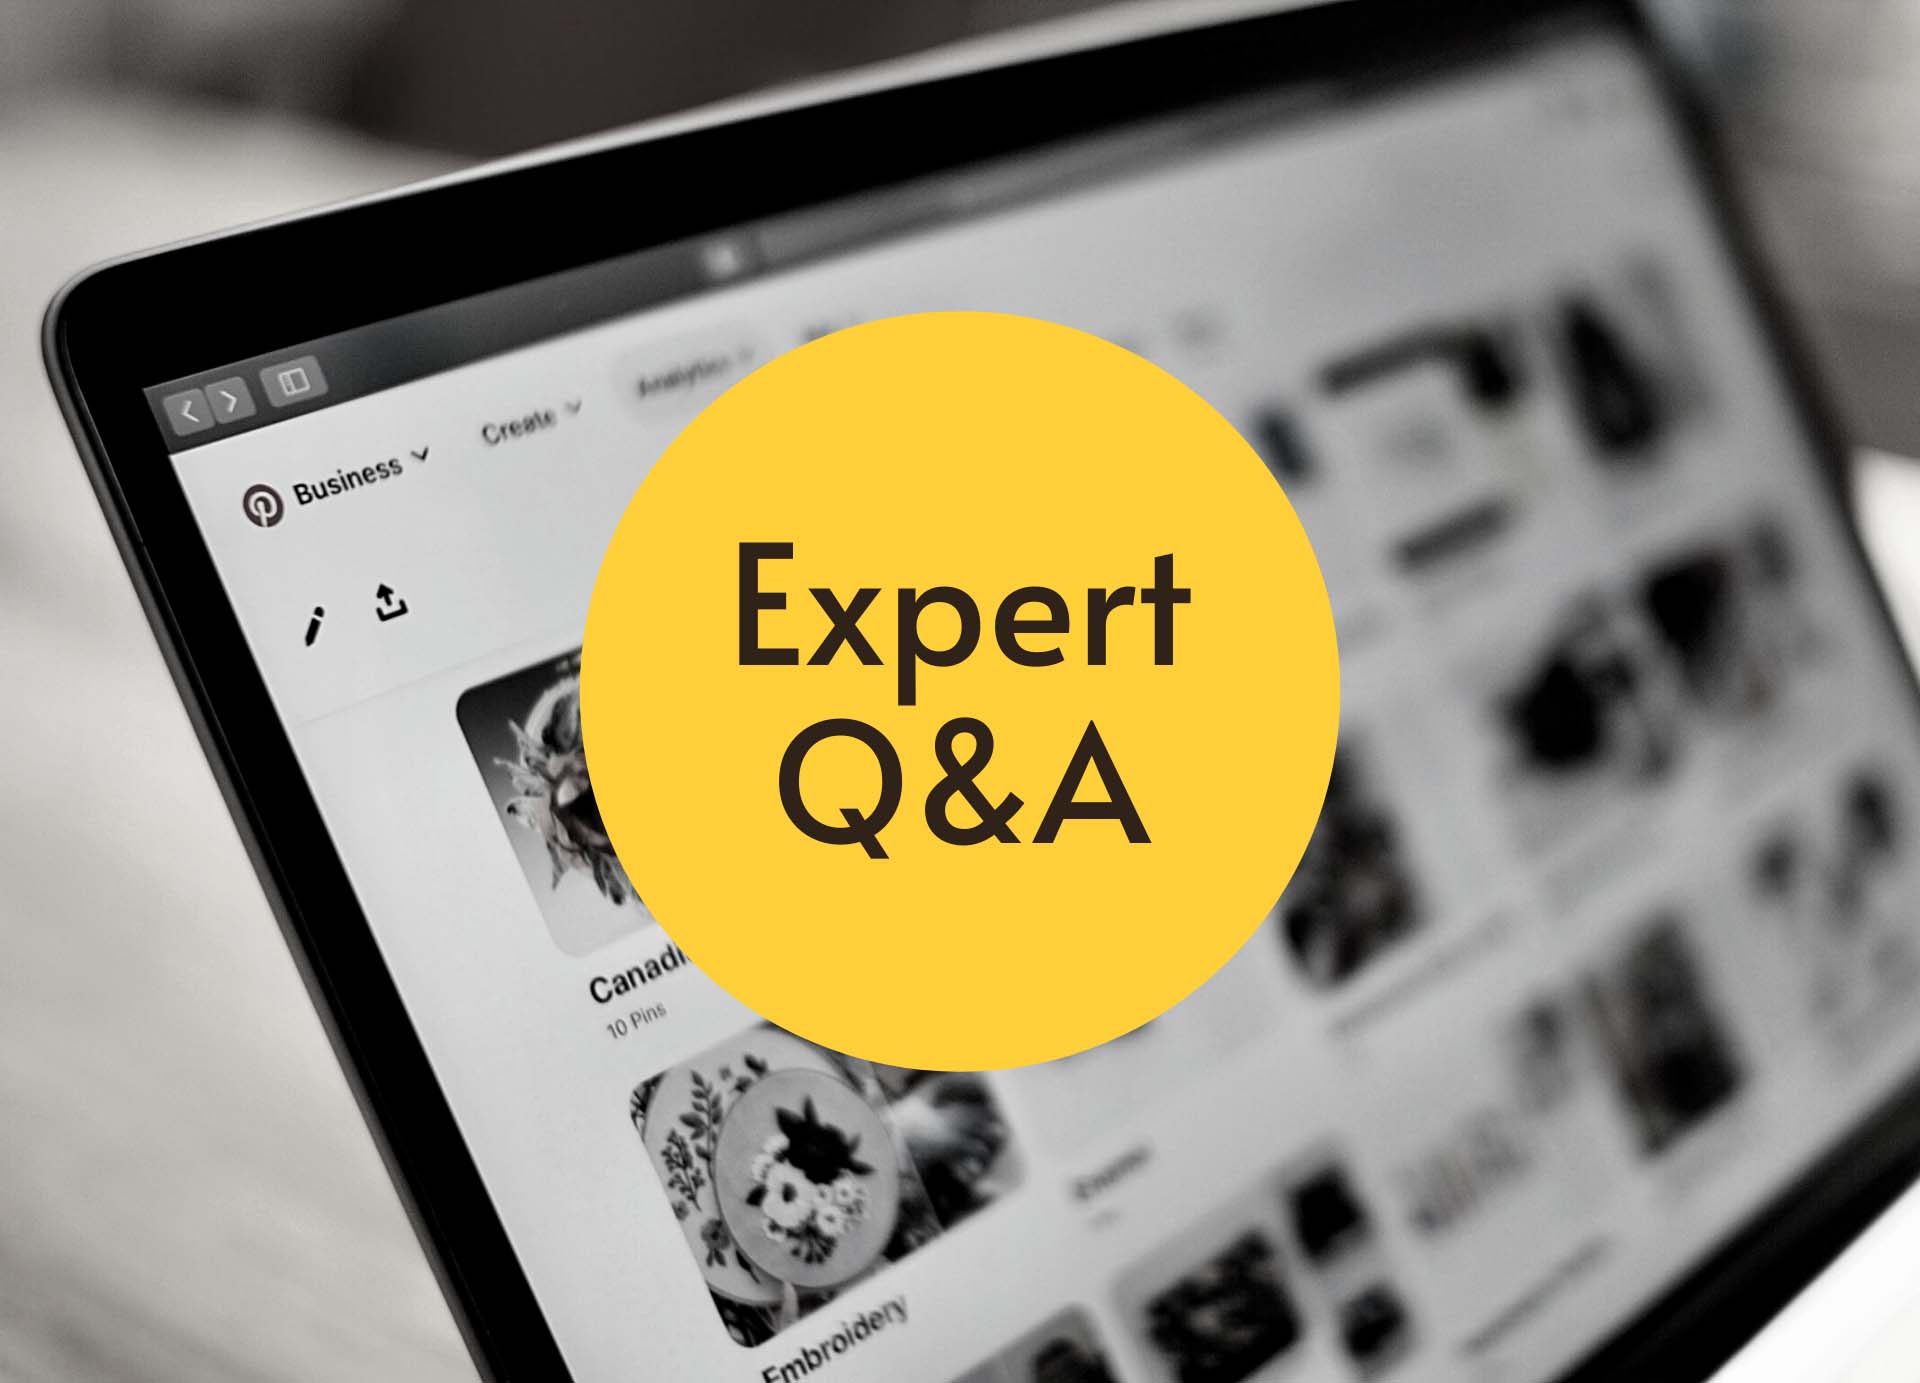 Words "Expert Q&A" in yellow circle above black-and-white photo of Pinterest feed